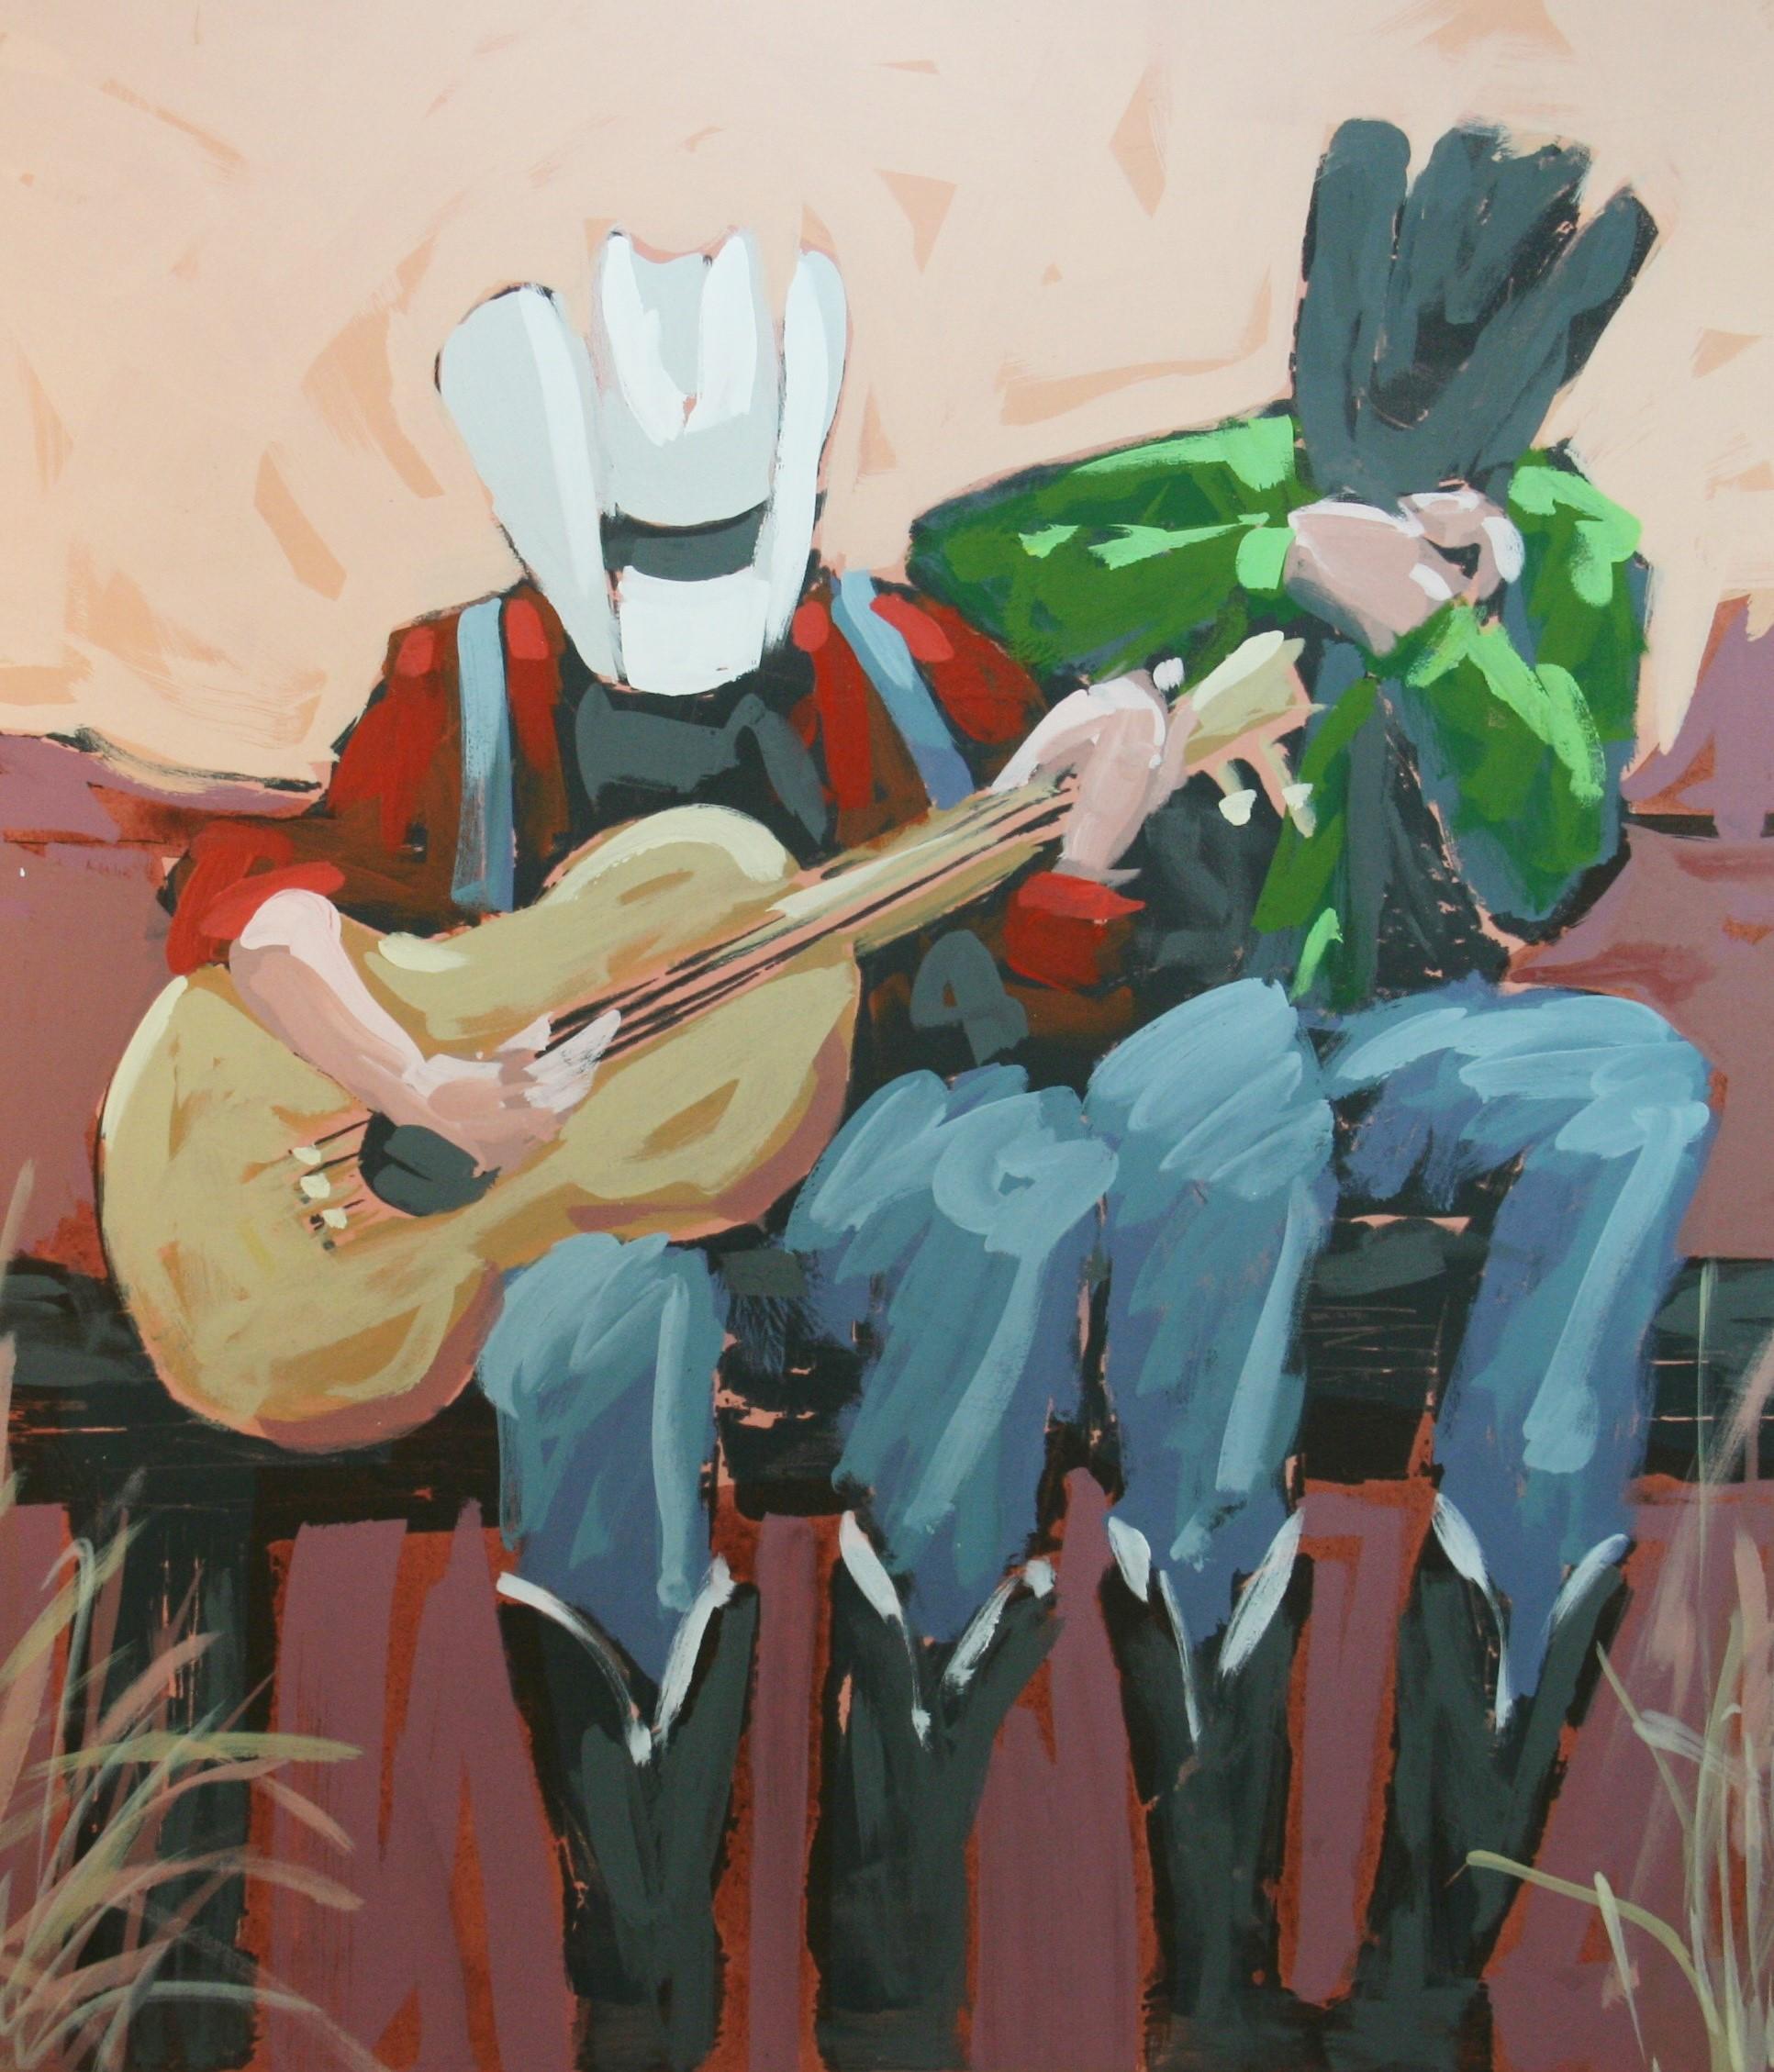 4017  Oversized acrylic on rapped canvas of two cowboys playing music
Signed Jon Alan